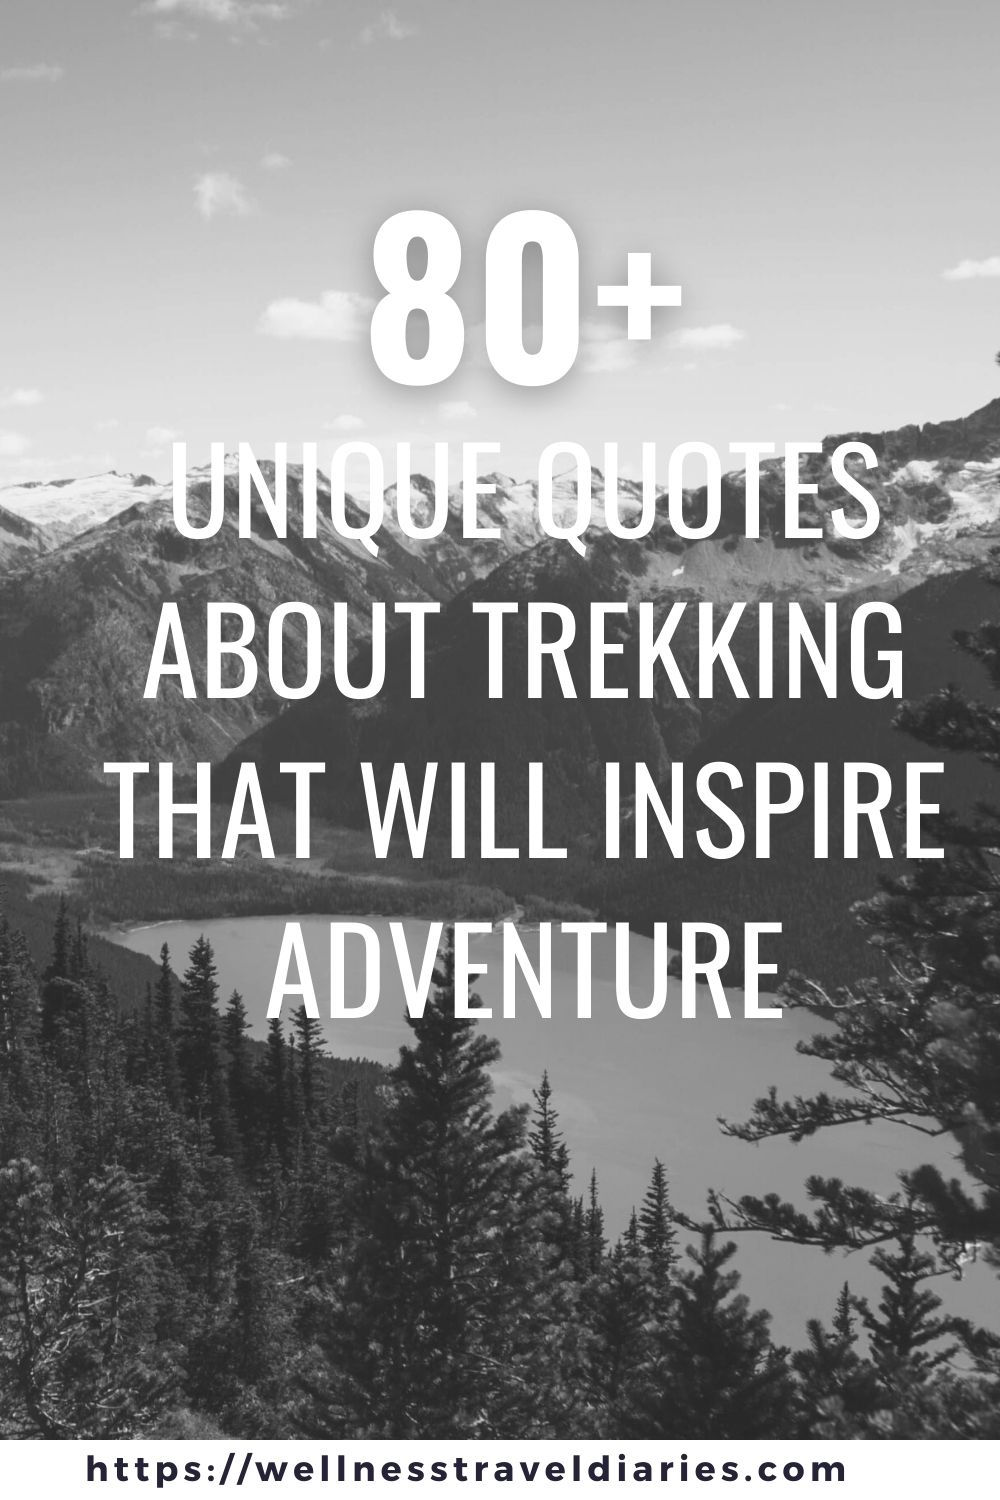 Unique Quotes About Trekking That Will Inspire Adventure - Wellness ...